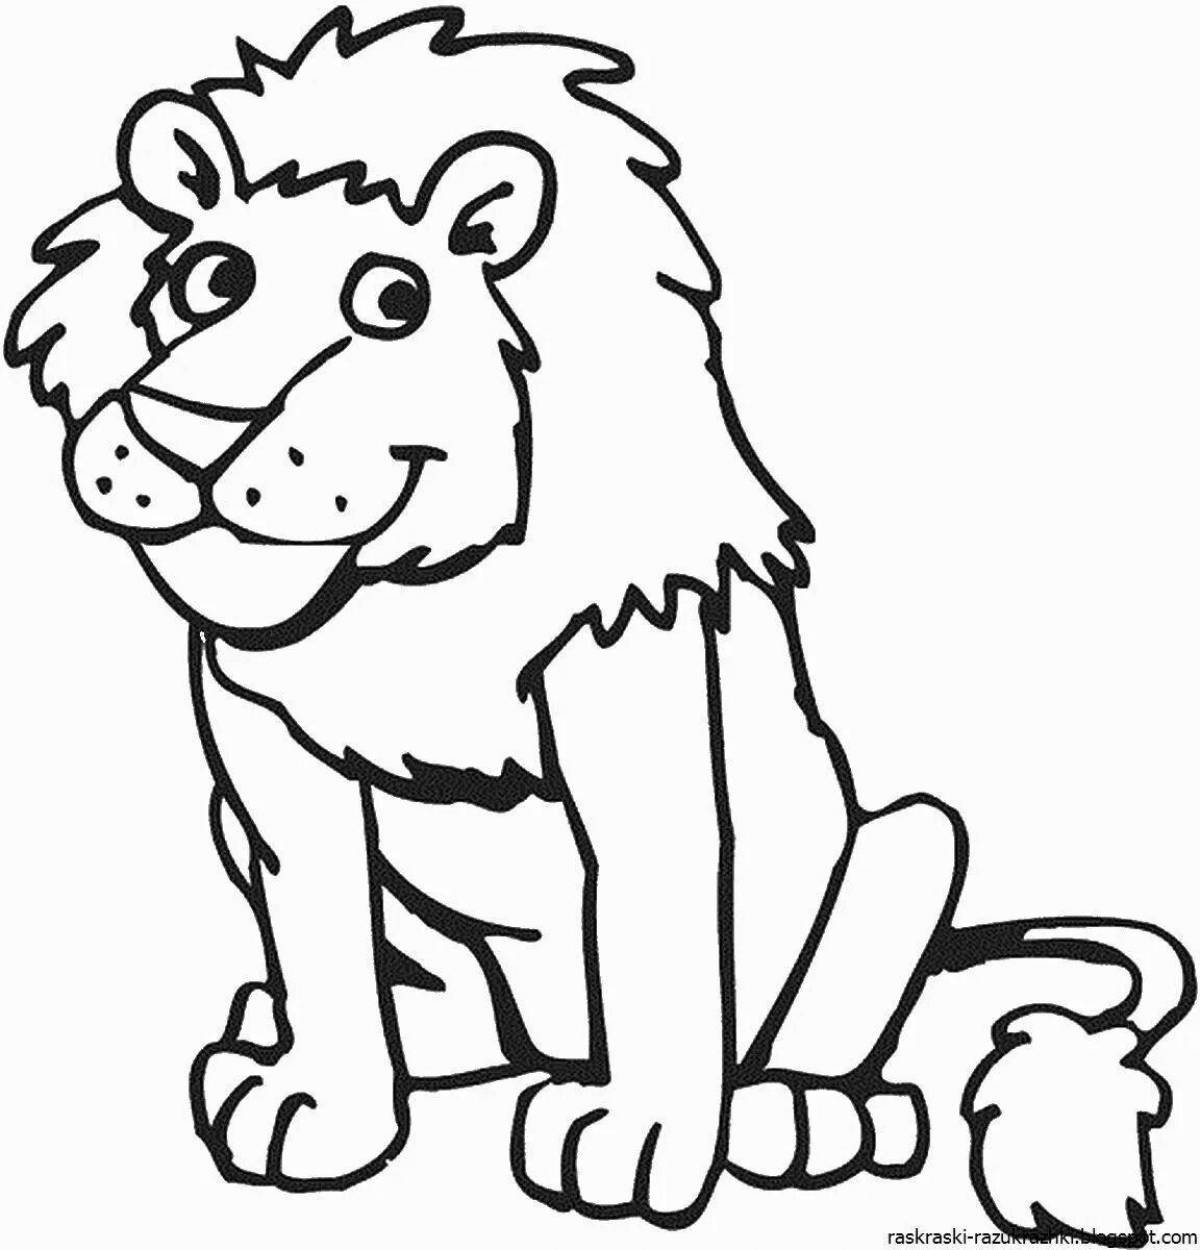 Exquisite lion coloring for kids